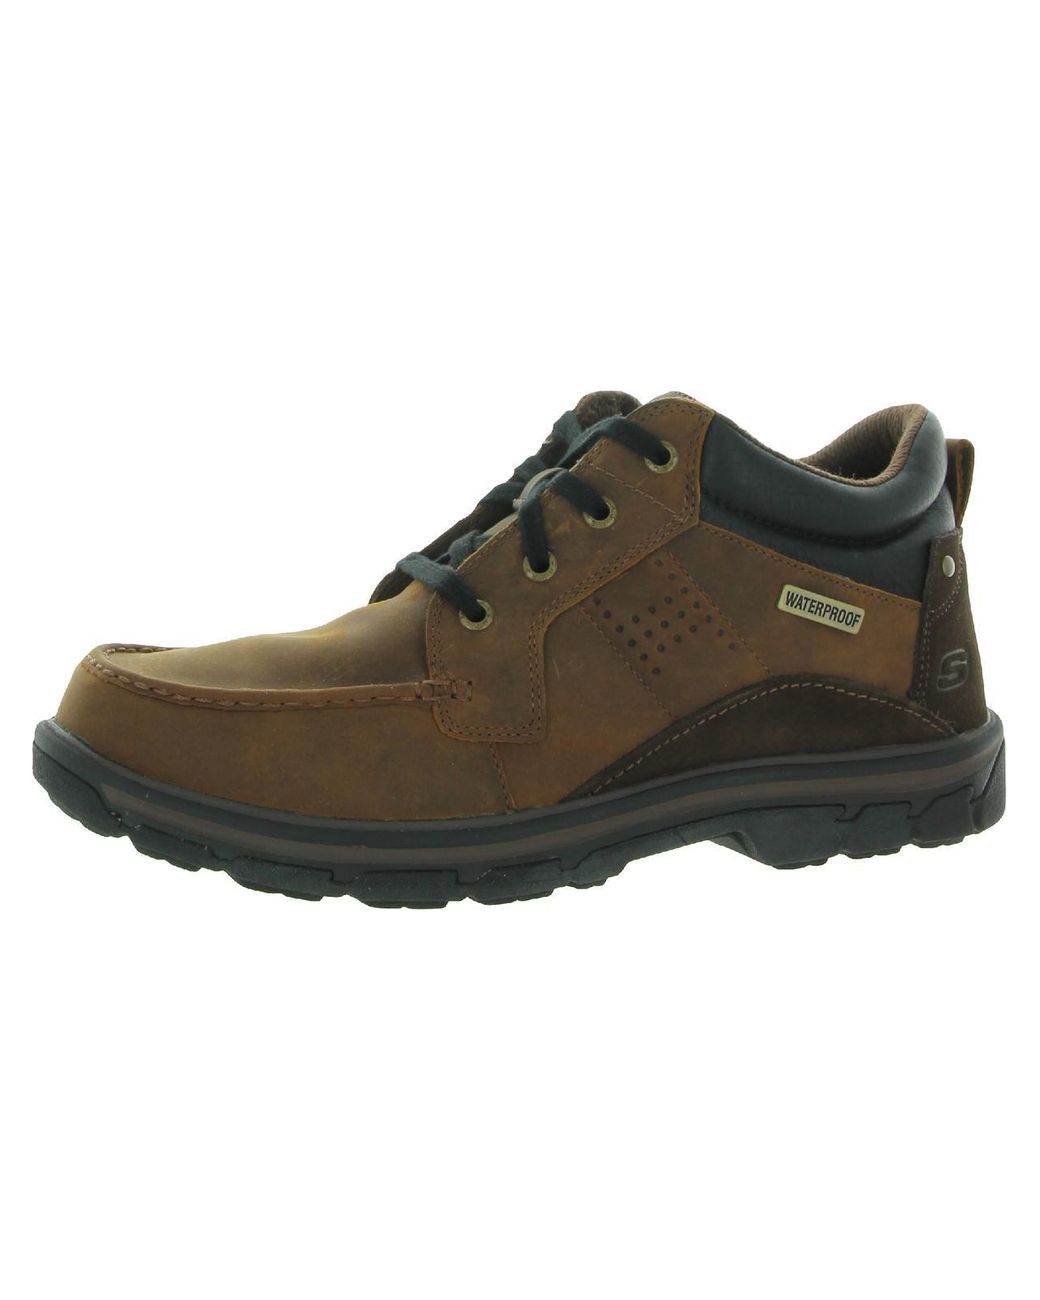 Skechers Segment Melego Leather Waterproof Chukka Boots in Brown for ...